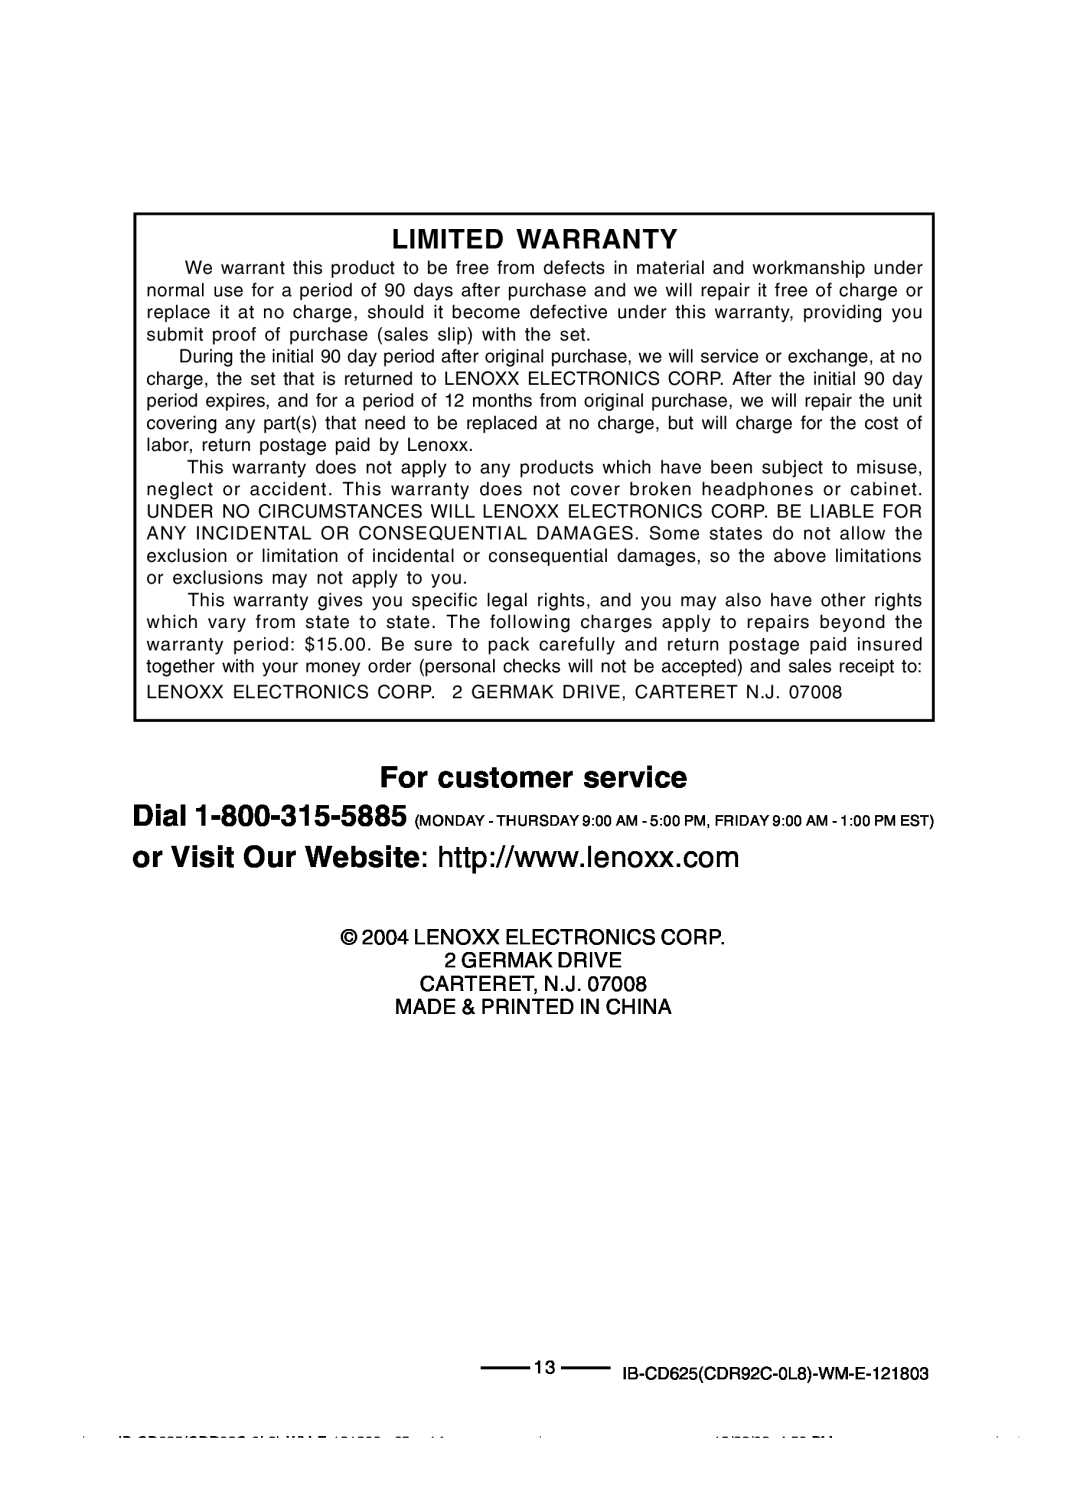 Lenoxx Electronics CD625 operating instructions For customer service, Limited Warranty 